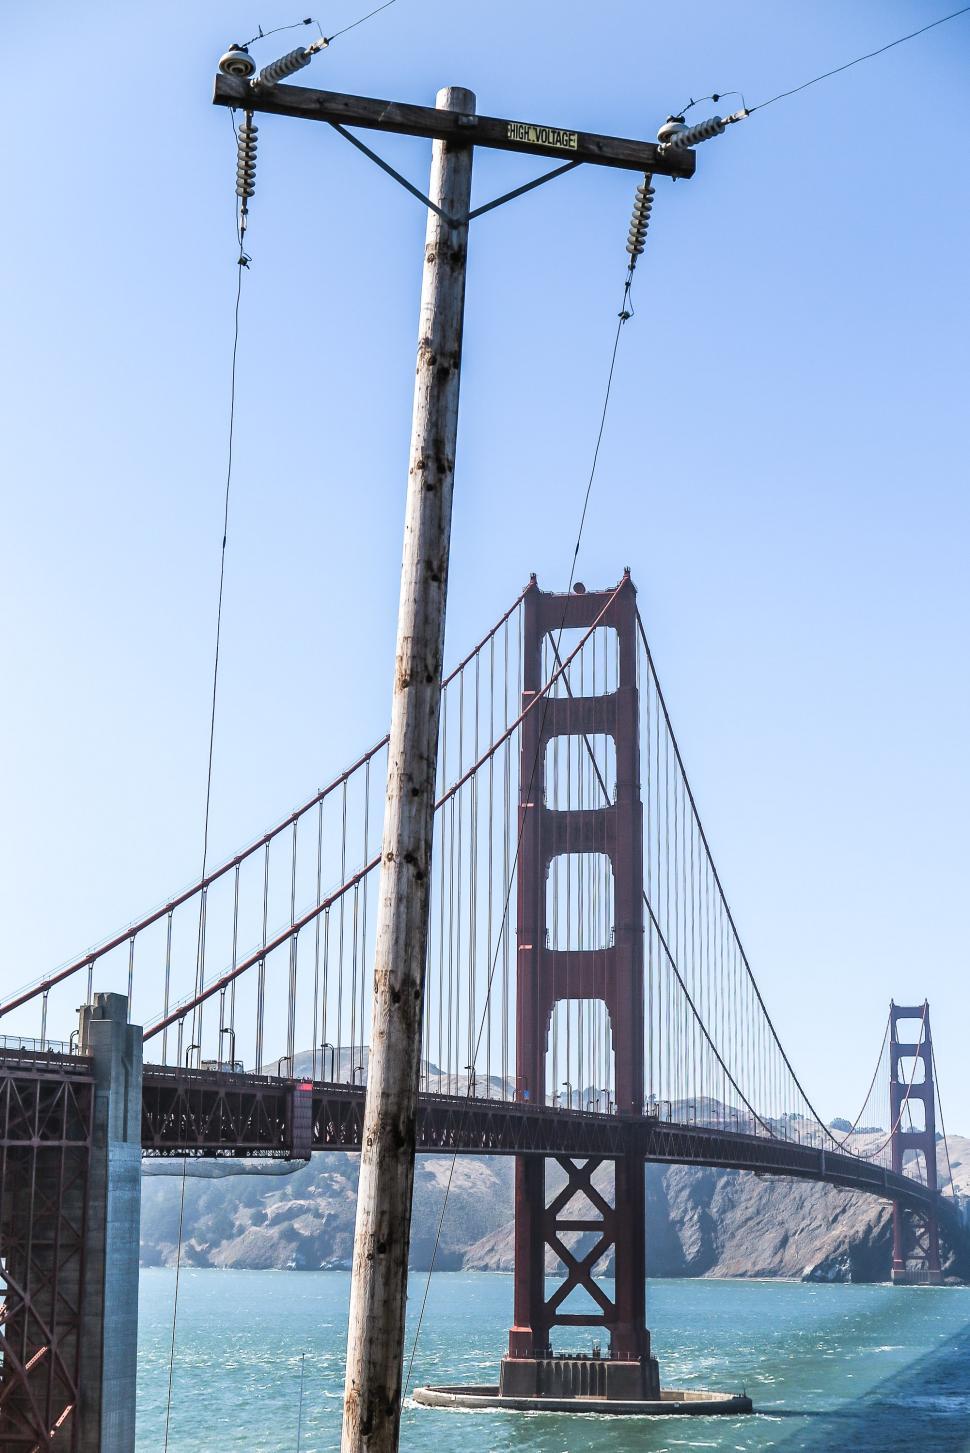 Free Image of Golden Gate bridge obscured by Telephone Pole 